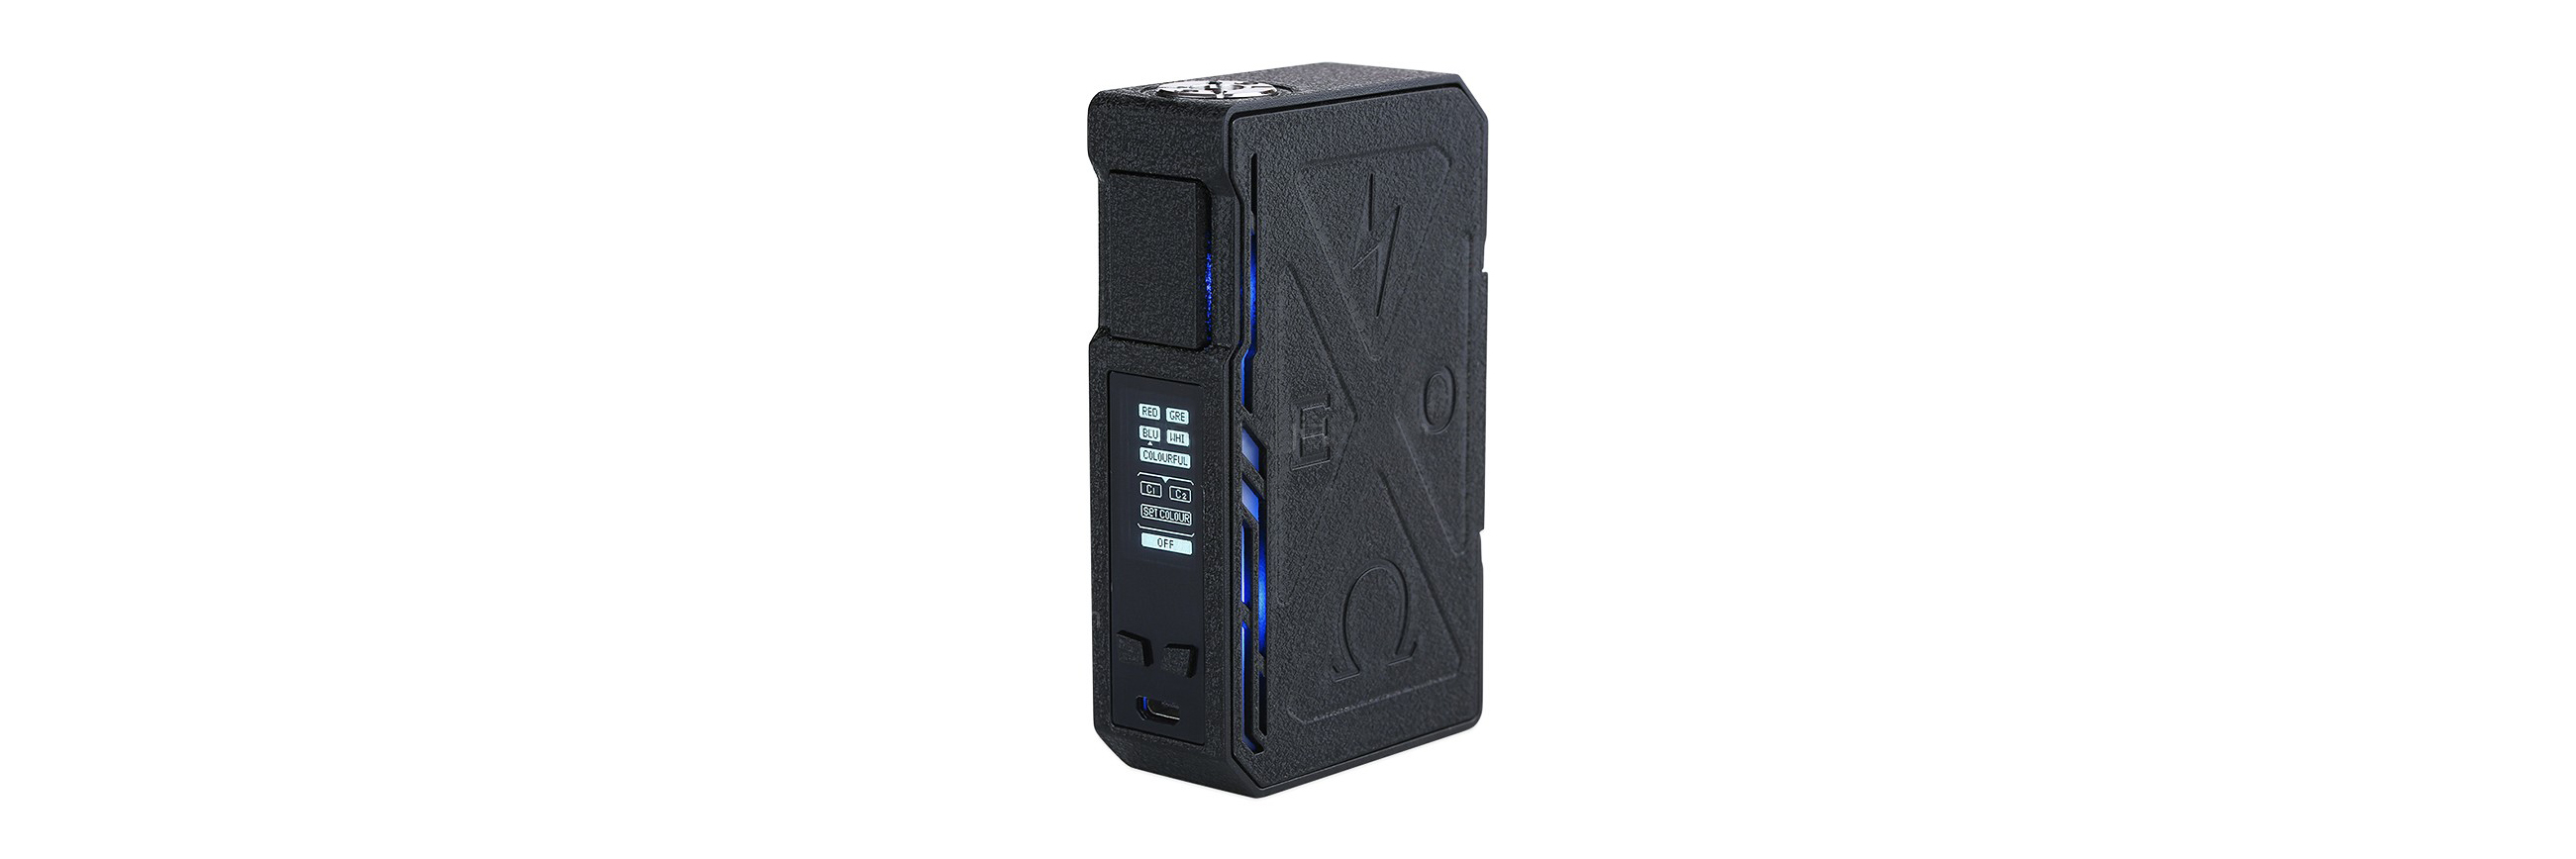 iJoy EXO PD270 боксмод